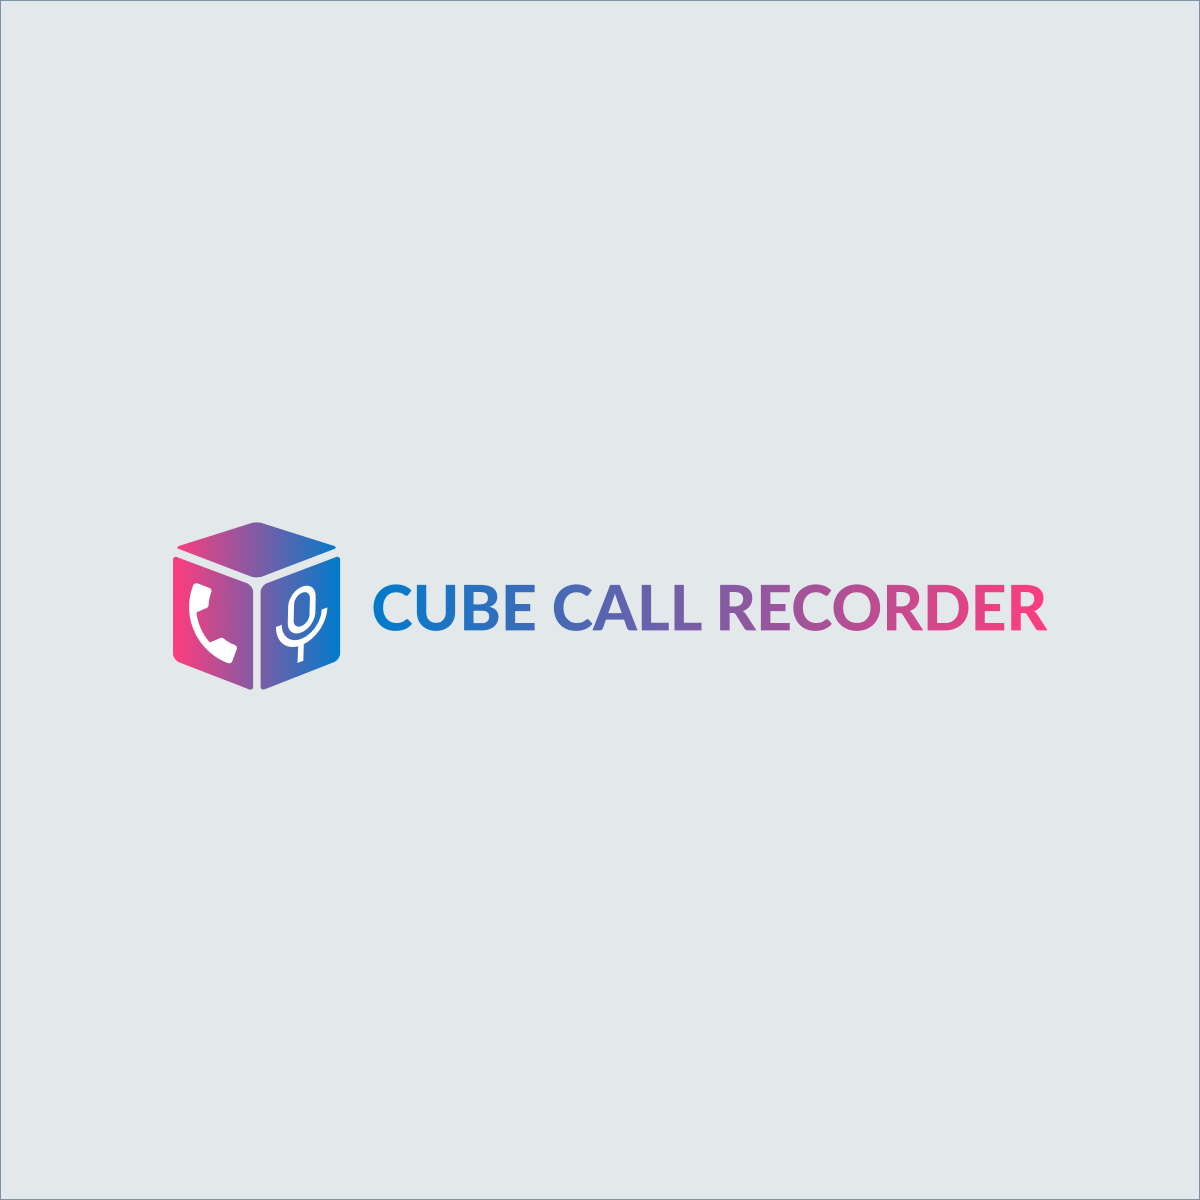 10 Best Call Recording Apps For Android 